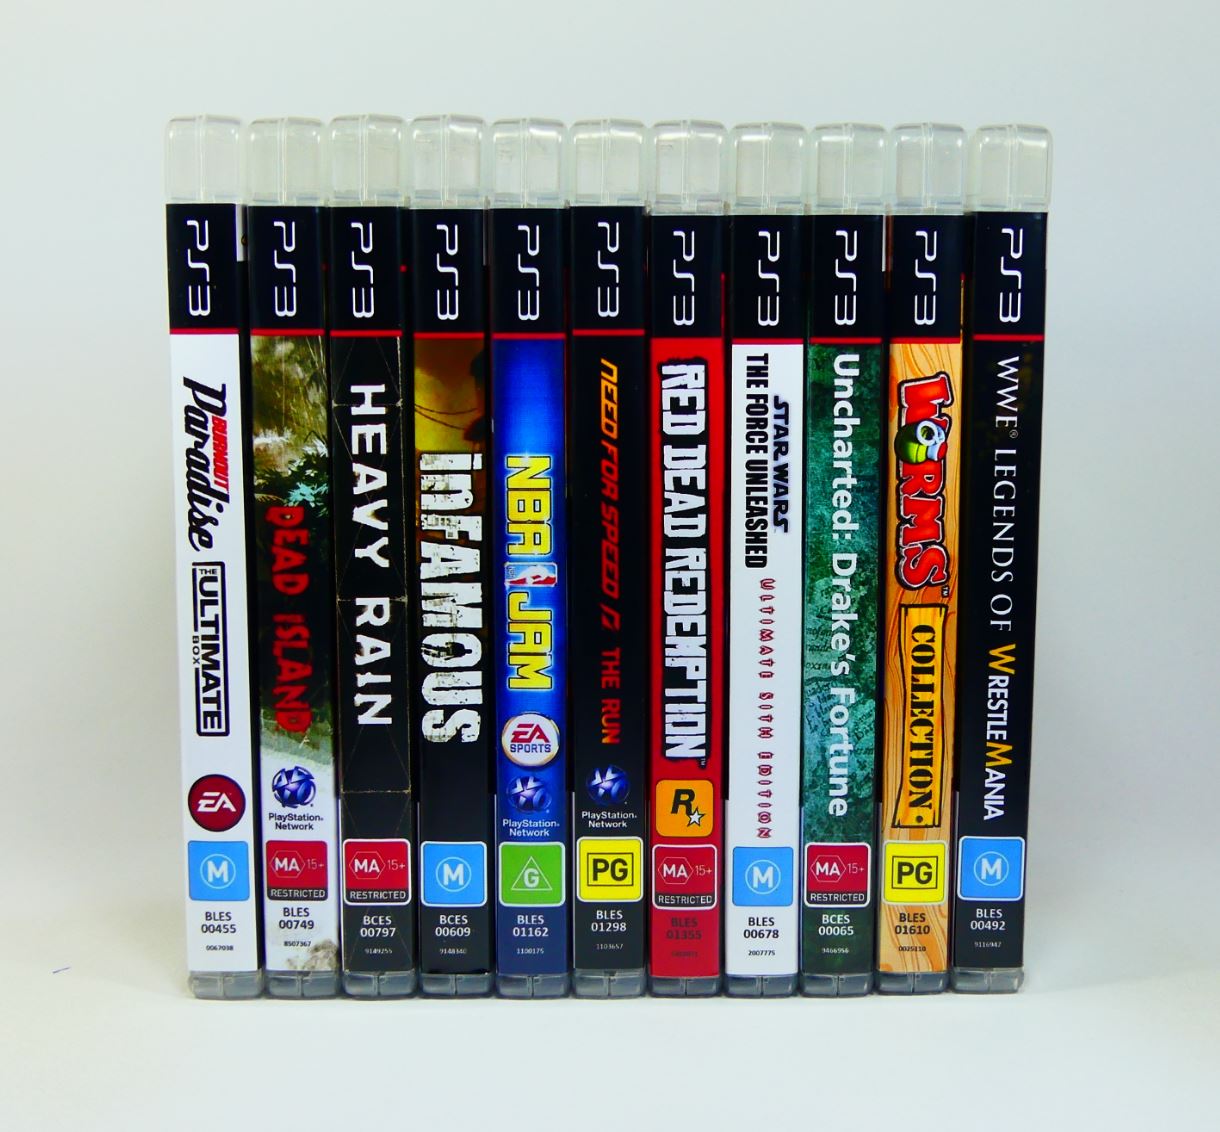 GTA San Andreas - PS3 Replacement Case